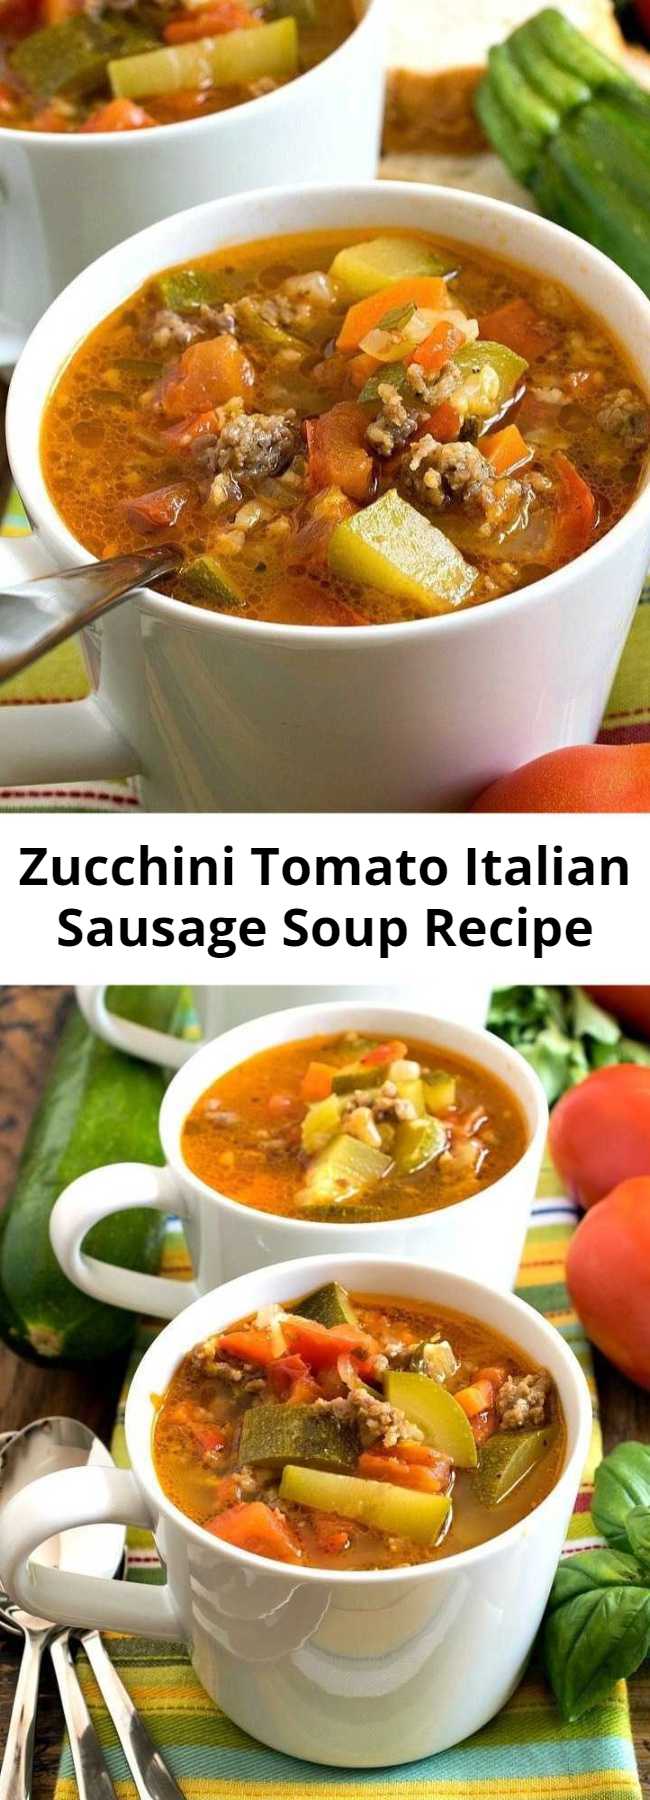 Zucchini Tomato Italian Sausage Soup Recipe - A zesty, super flavorful soup made with fresh zucchini and tomatoes. Sweet Italian sausage adds more great flavor too! #soup #zucchini #tomatoes #Italiansausage